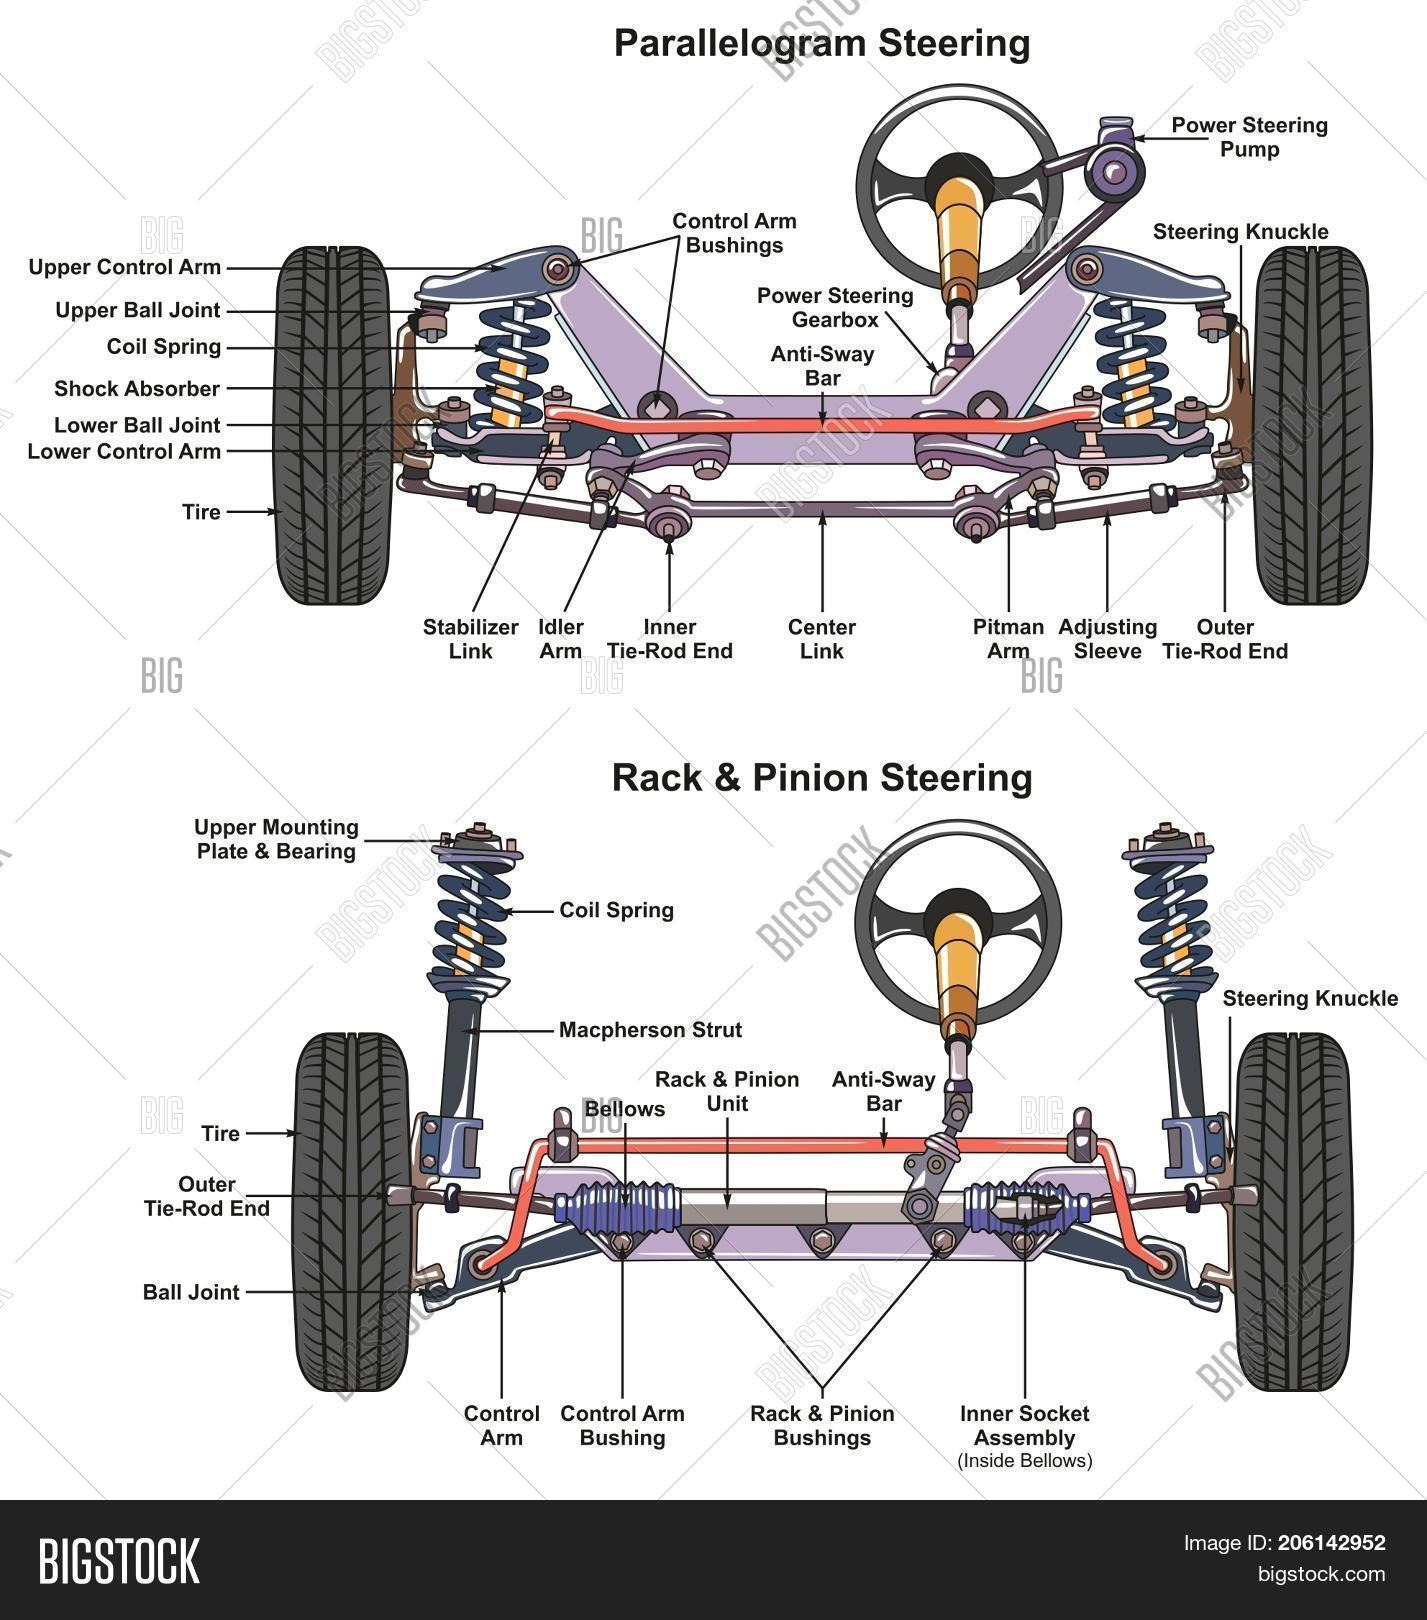 automotive-steering-system-part-id-worksheets-automotive-math-worksheets